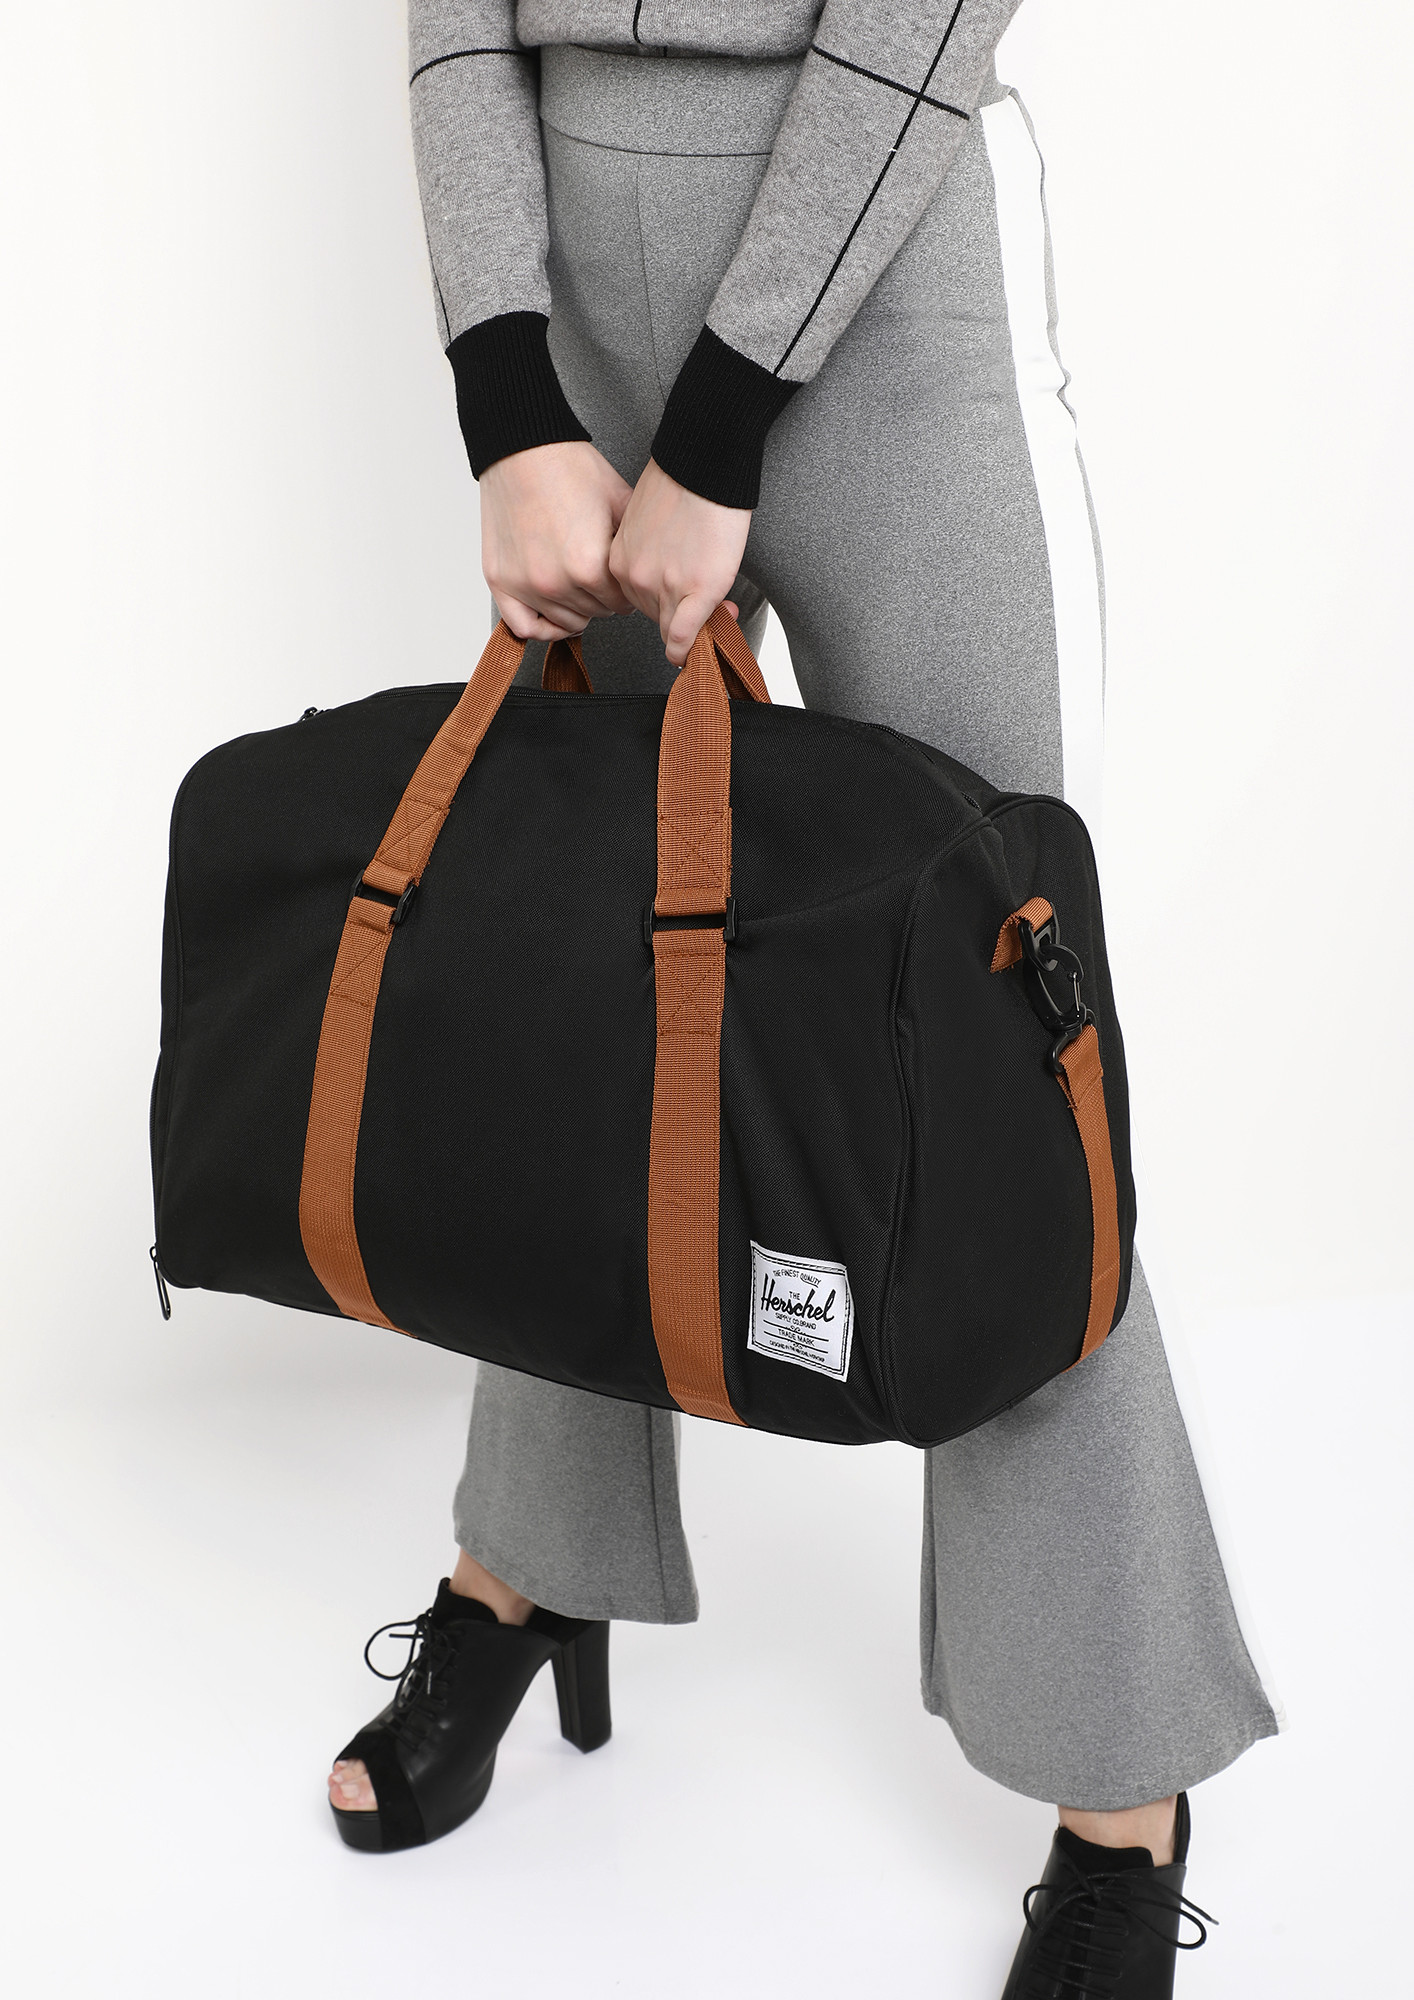 ALL WORKED UP BLACK DUFFLE BAG